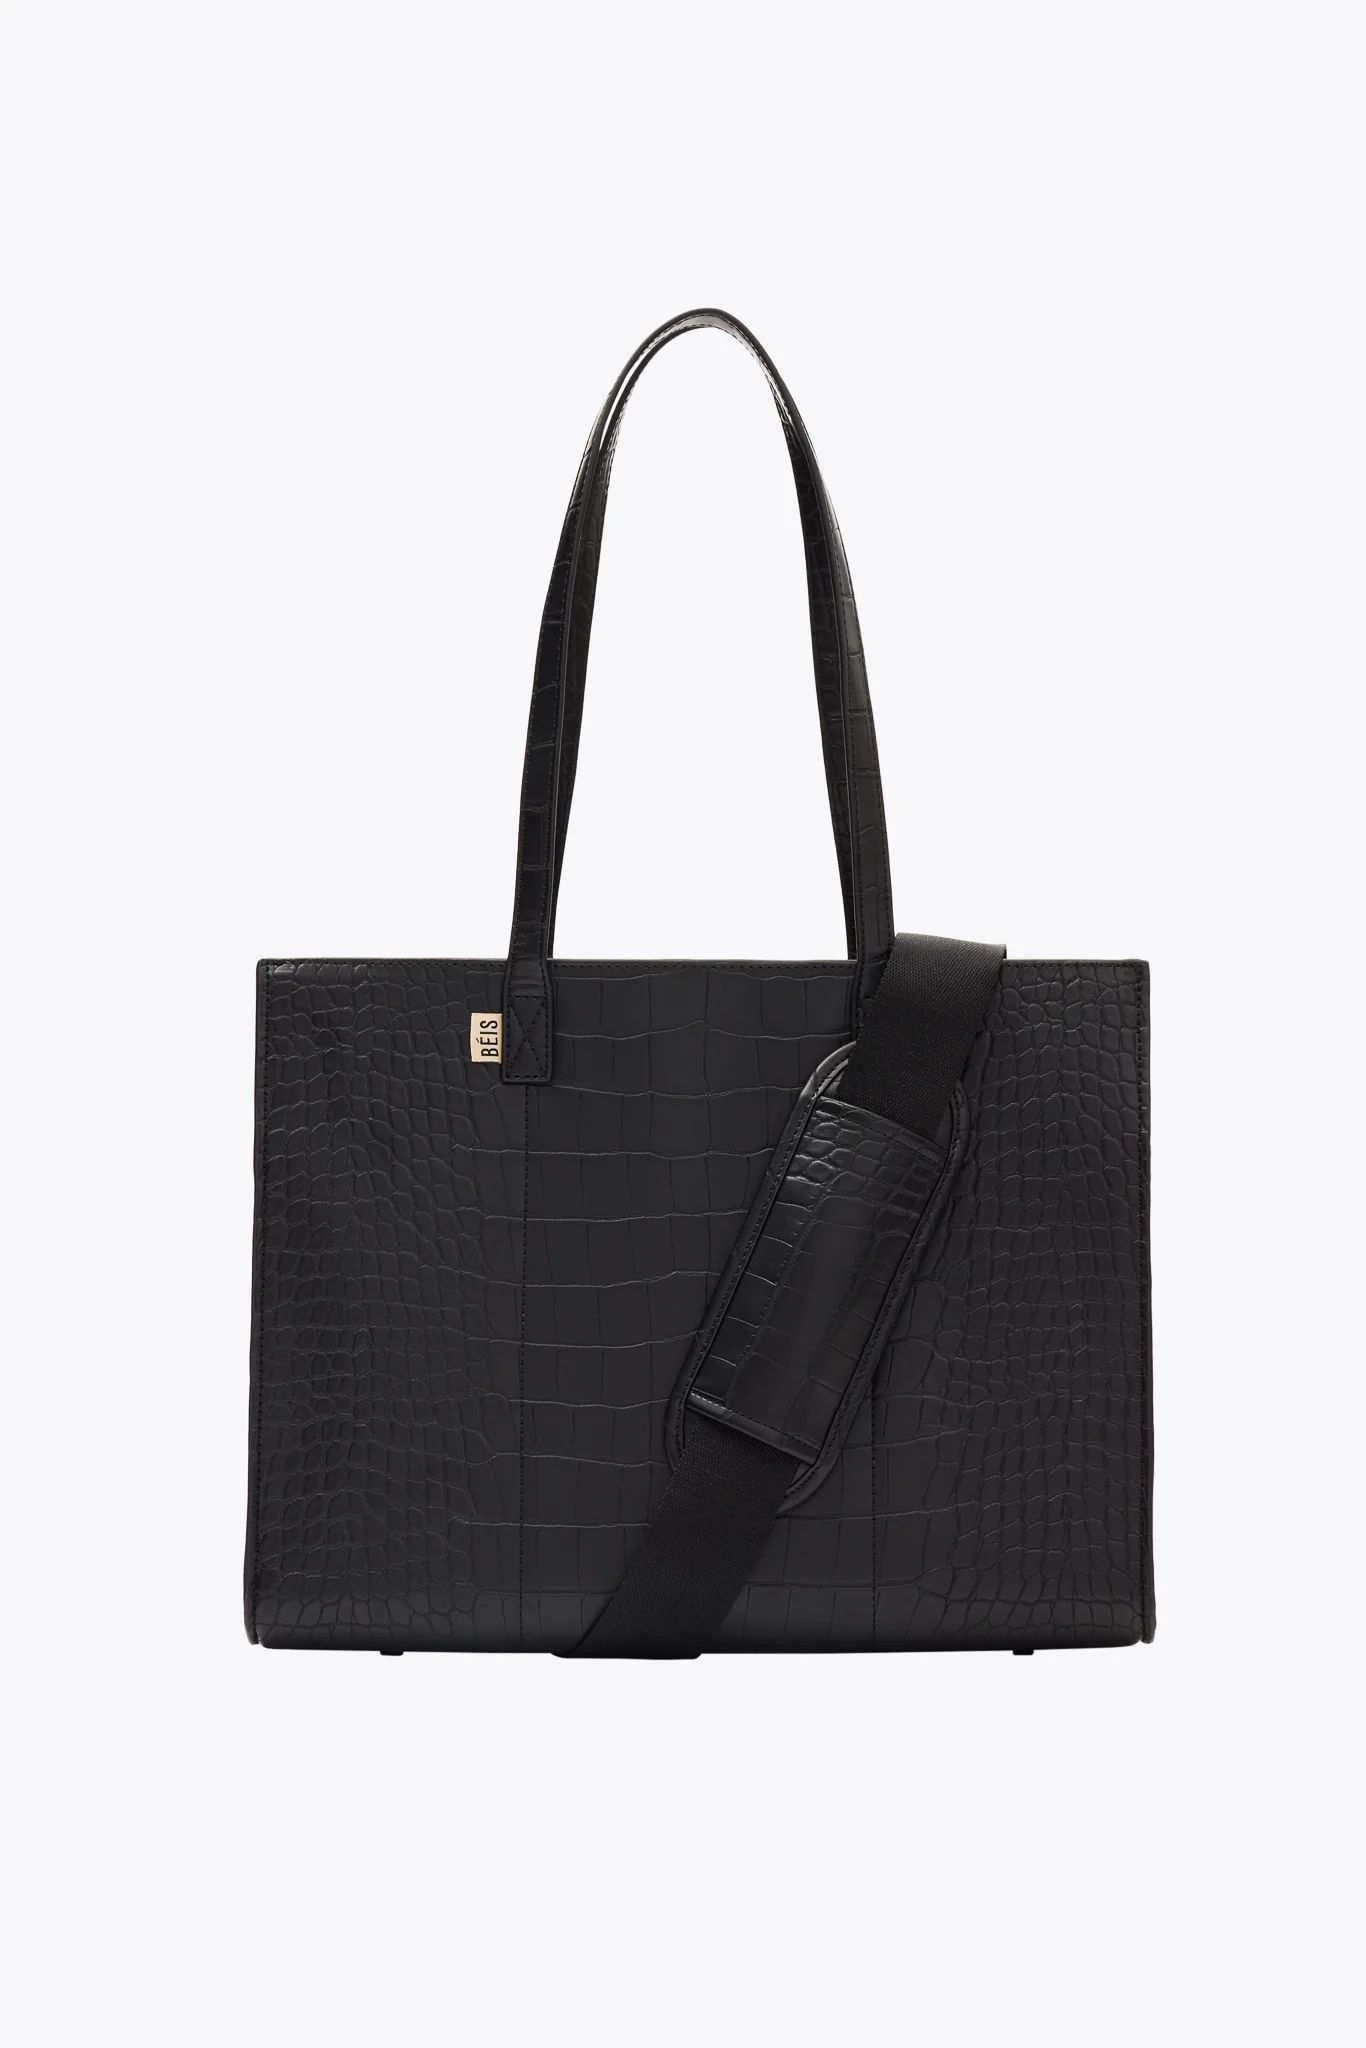 The Work Tote in Black Croc | BÉIS Travel